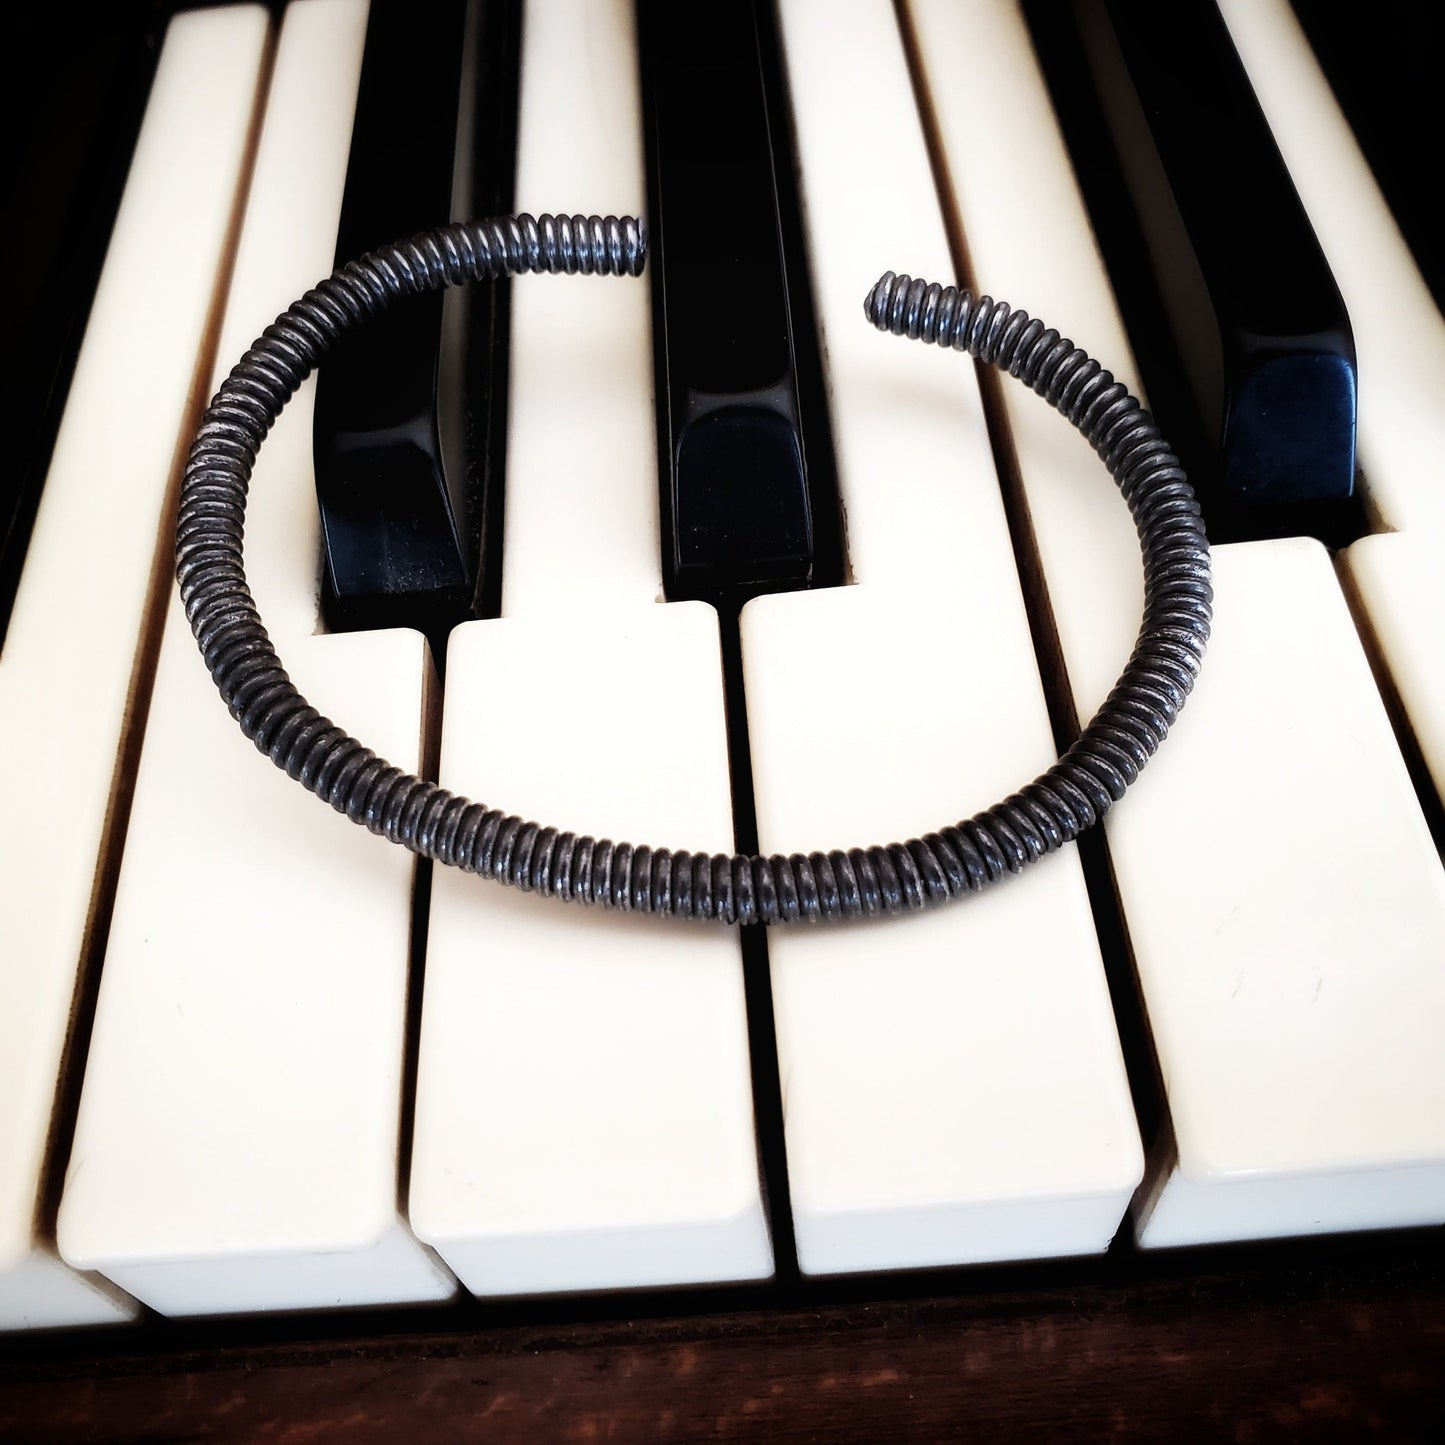 charcoal grey cuff style bracelet made from an upcycled piano string - bracelet is lying on piano keys